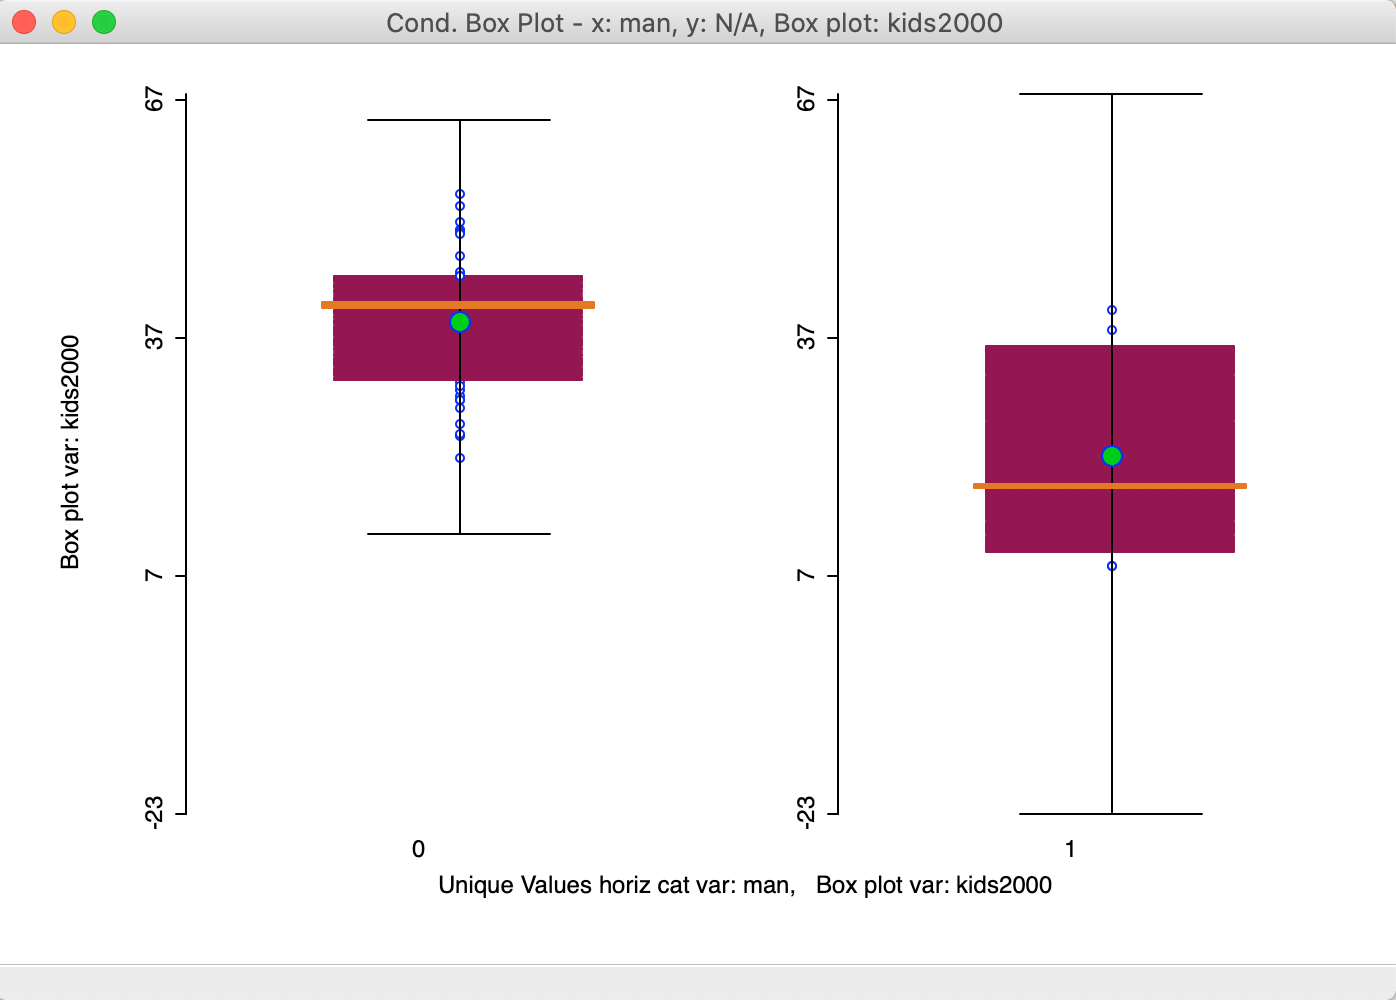 Conditional box plot for Manhattan and rest